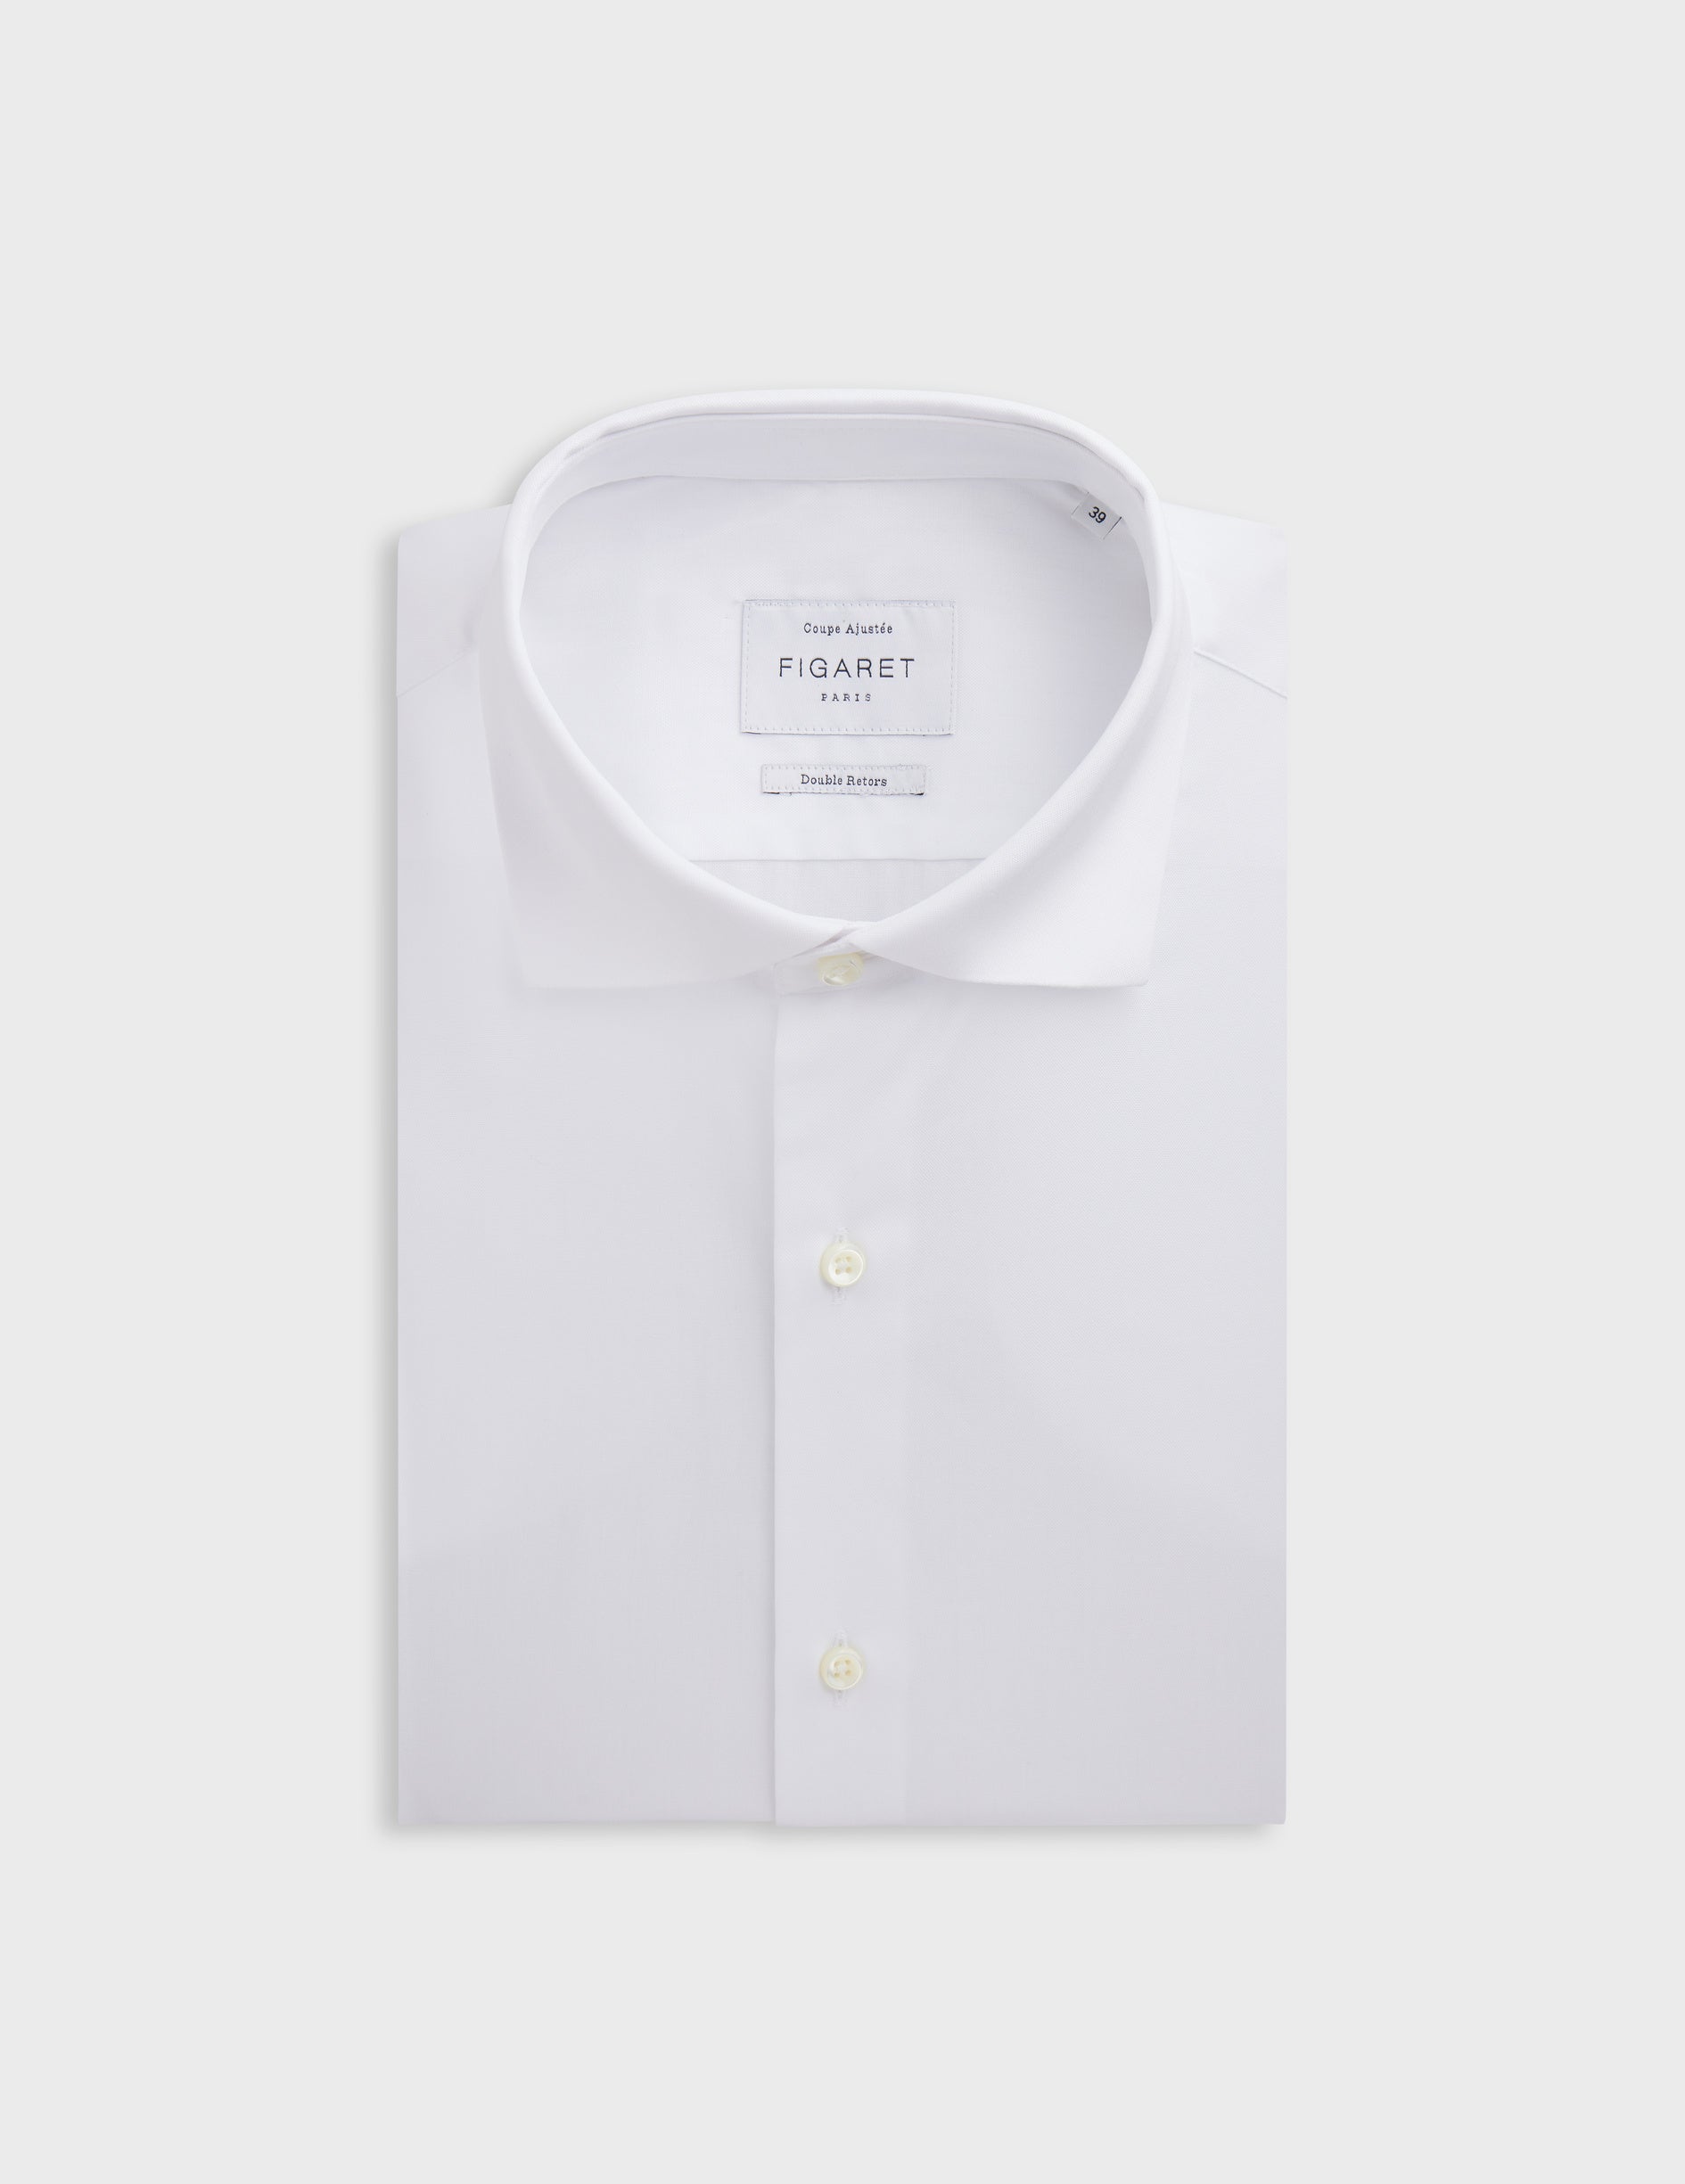 Fitted white shirt - pin point - Italian Collar